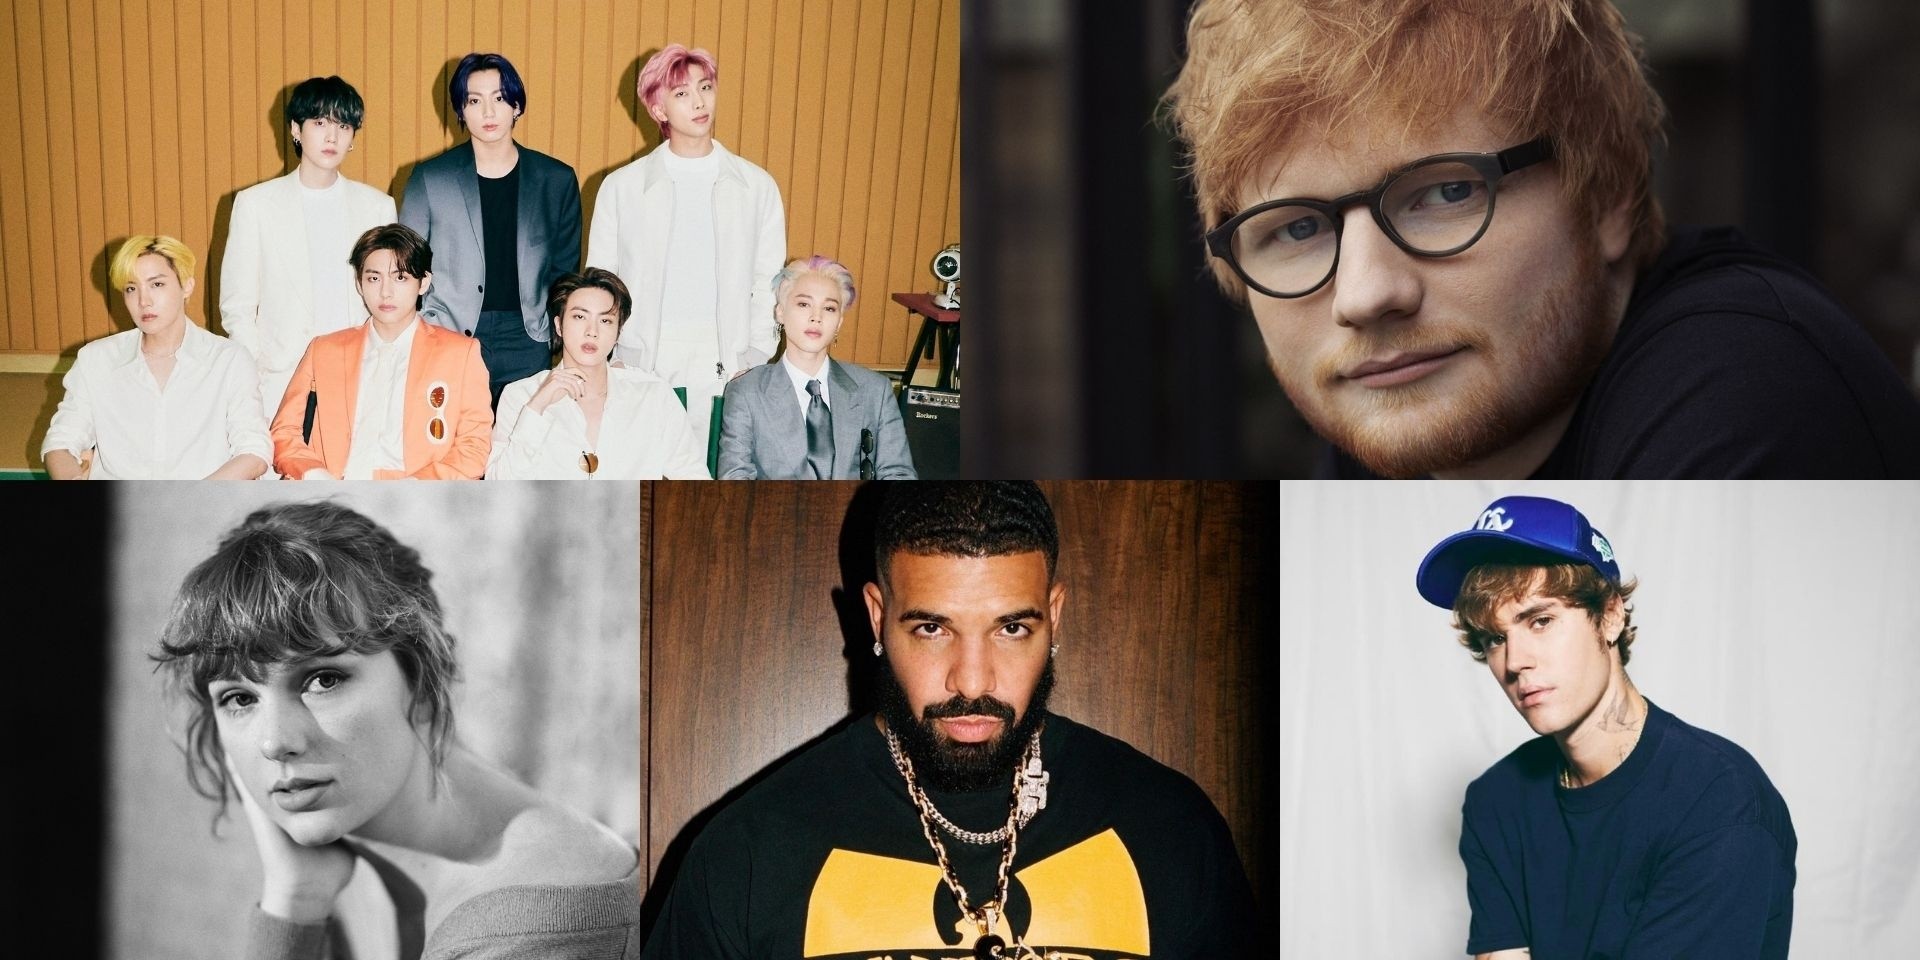 Here are the top 10 Spotify debuts of all time —  BTS, Ed Sheeran, Justin Bieber, Taylor Swift, Drake, and more